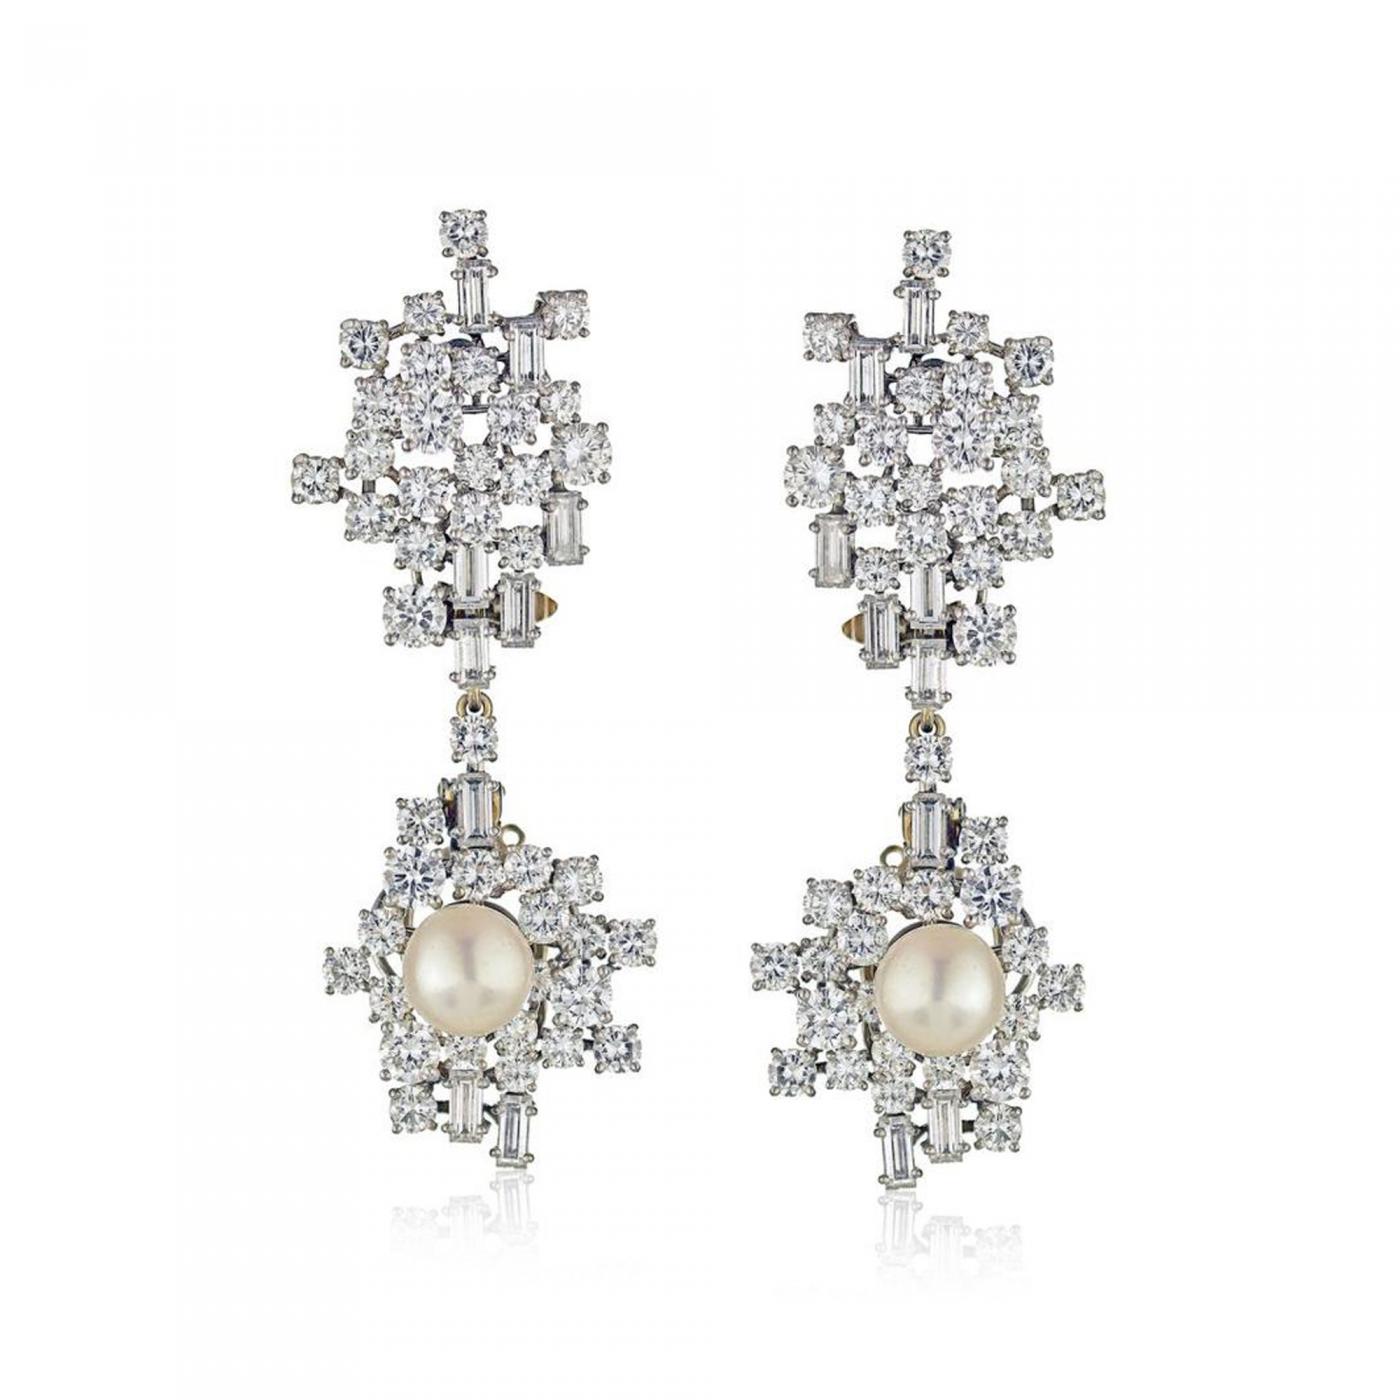 Nuages d'Or Earrings White Gold - 083632 - Chaumet